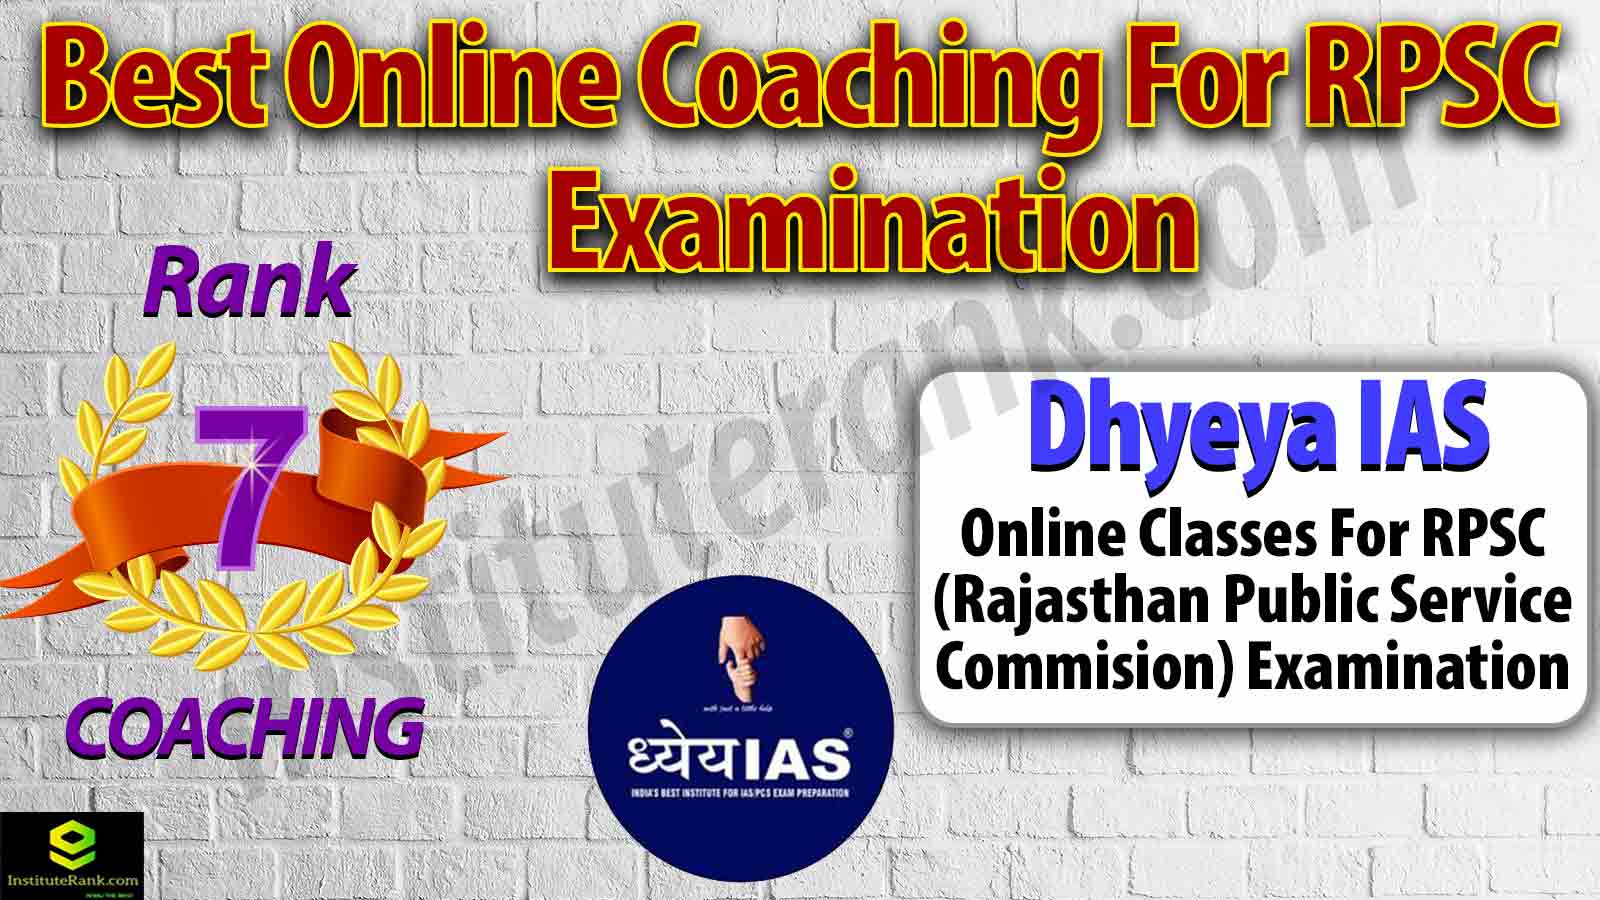 Top Online Coaching for RPSC Exam Preparation